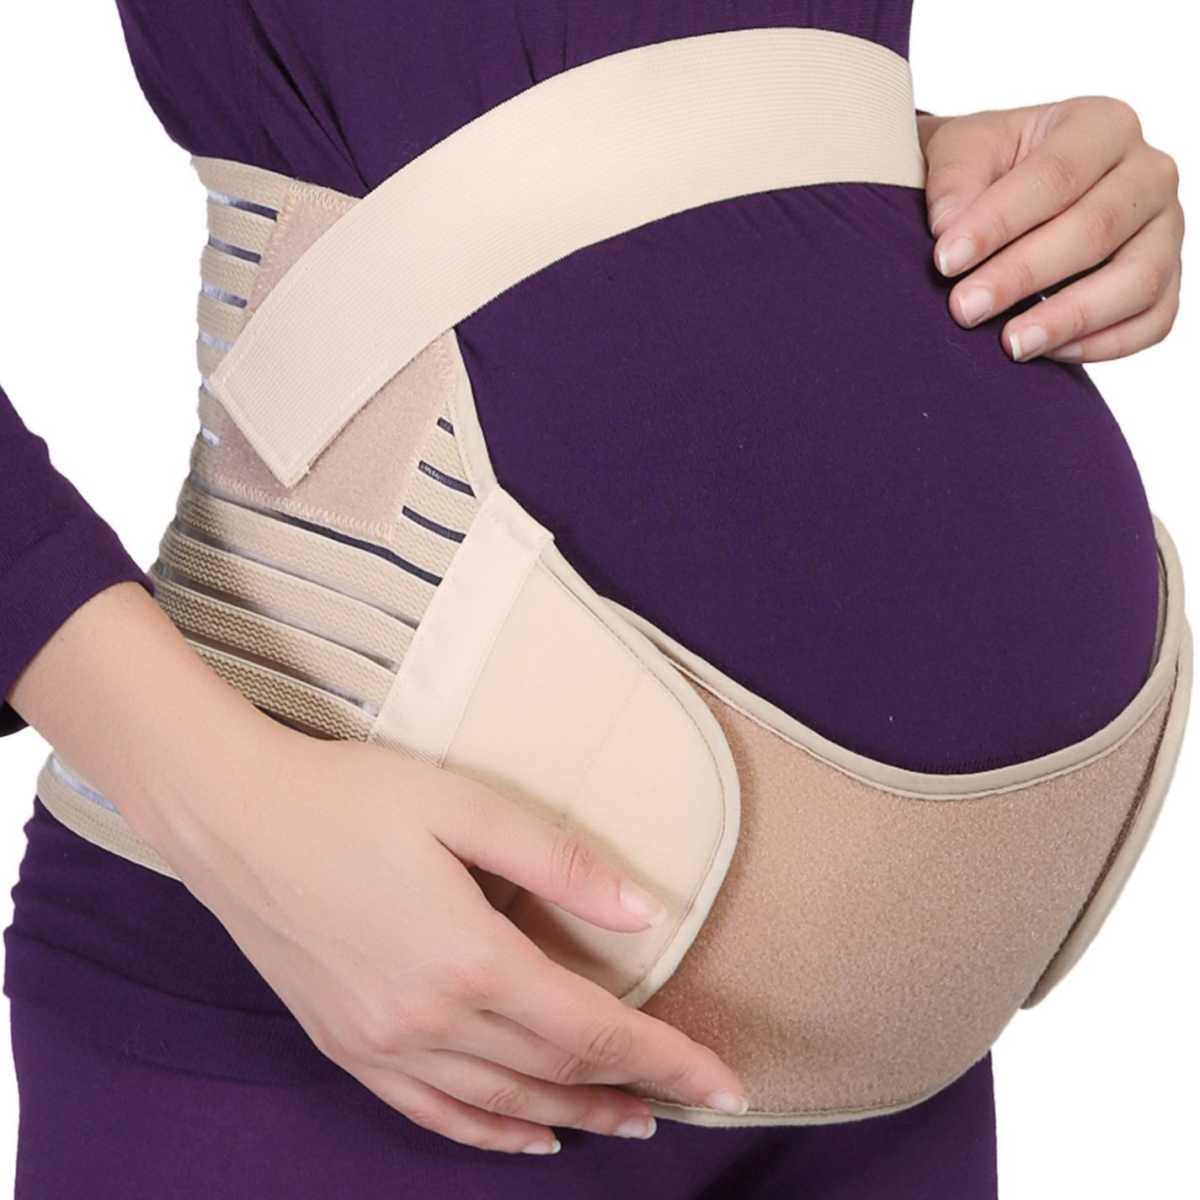 Pregnancy Products for Expecting Mothers